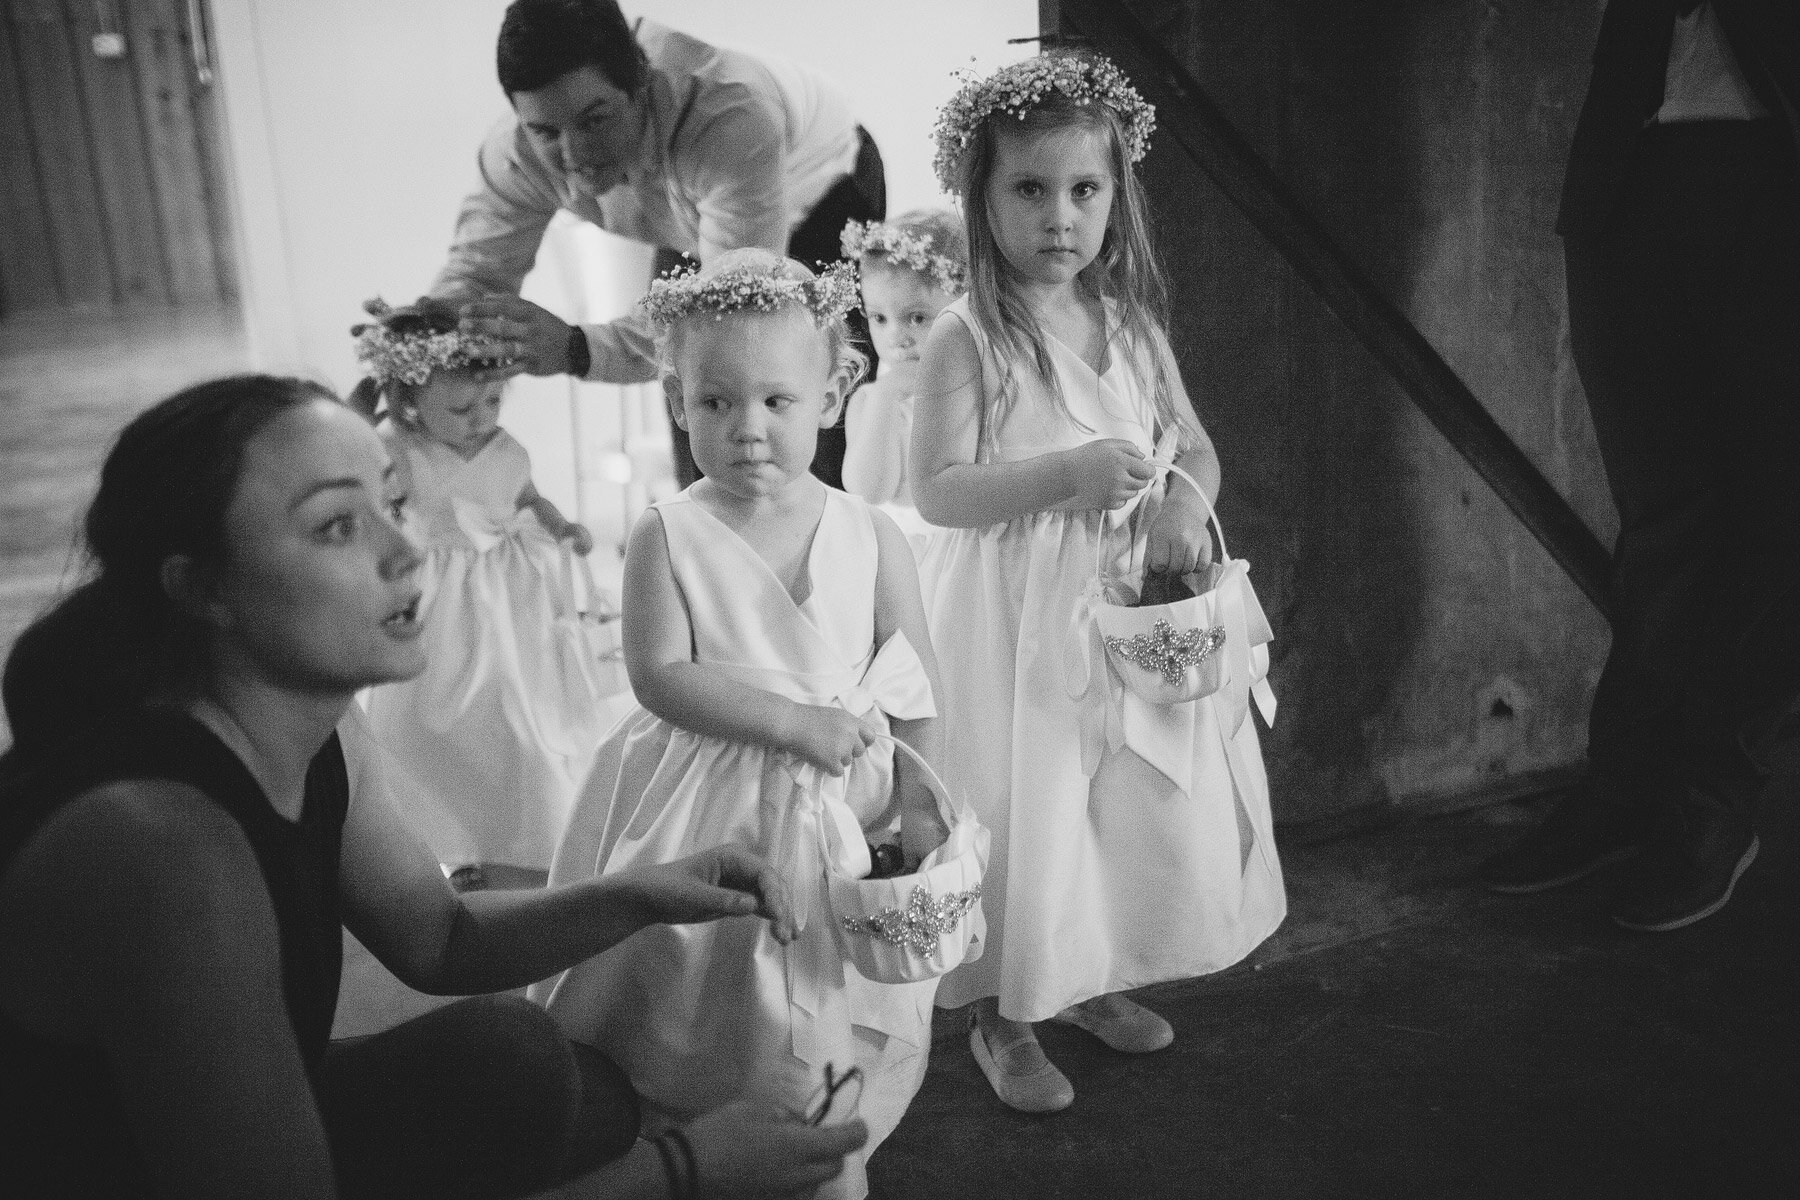  I swear this little flower girl was listening so hard!  She was really wanting to do a good job. 